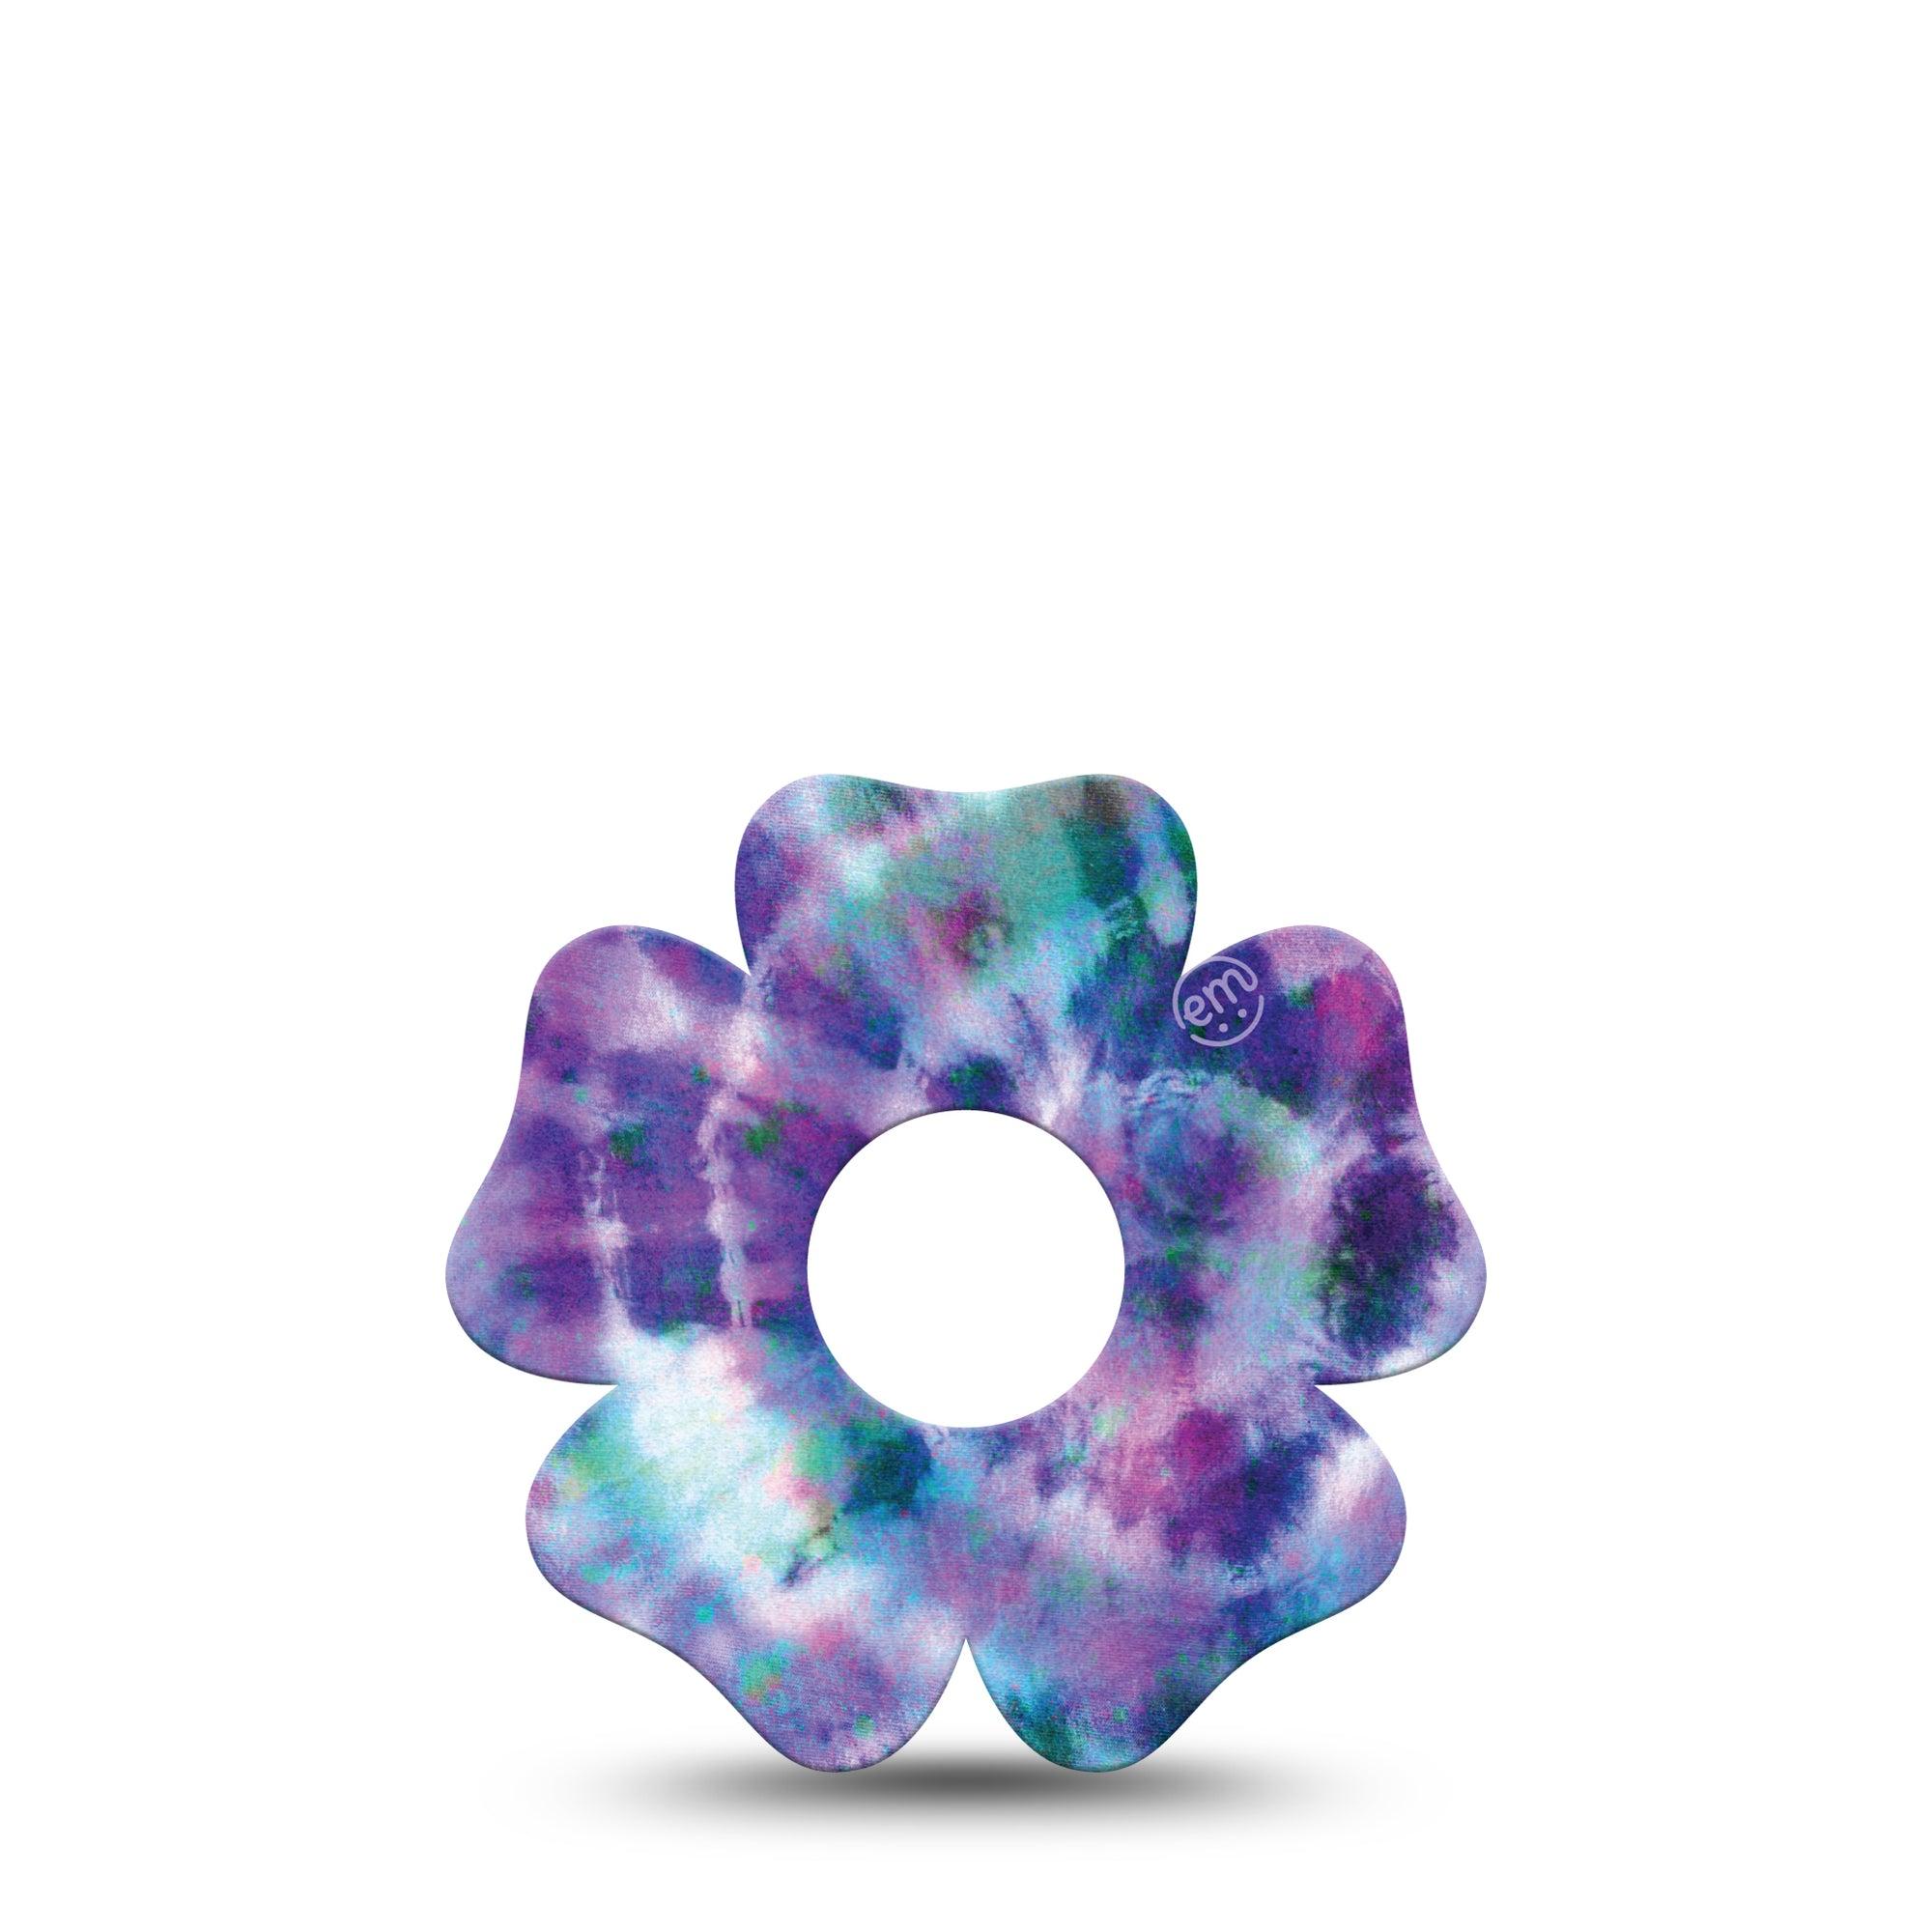 ExpressionMed Purple Tie Dye Flower Libre 3 Tape, Single, Dye Pattern Themed, CGM Overlay Patch Design